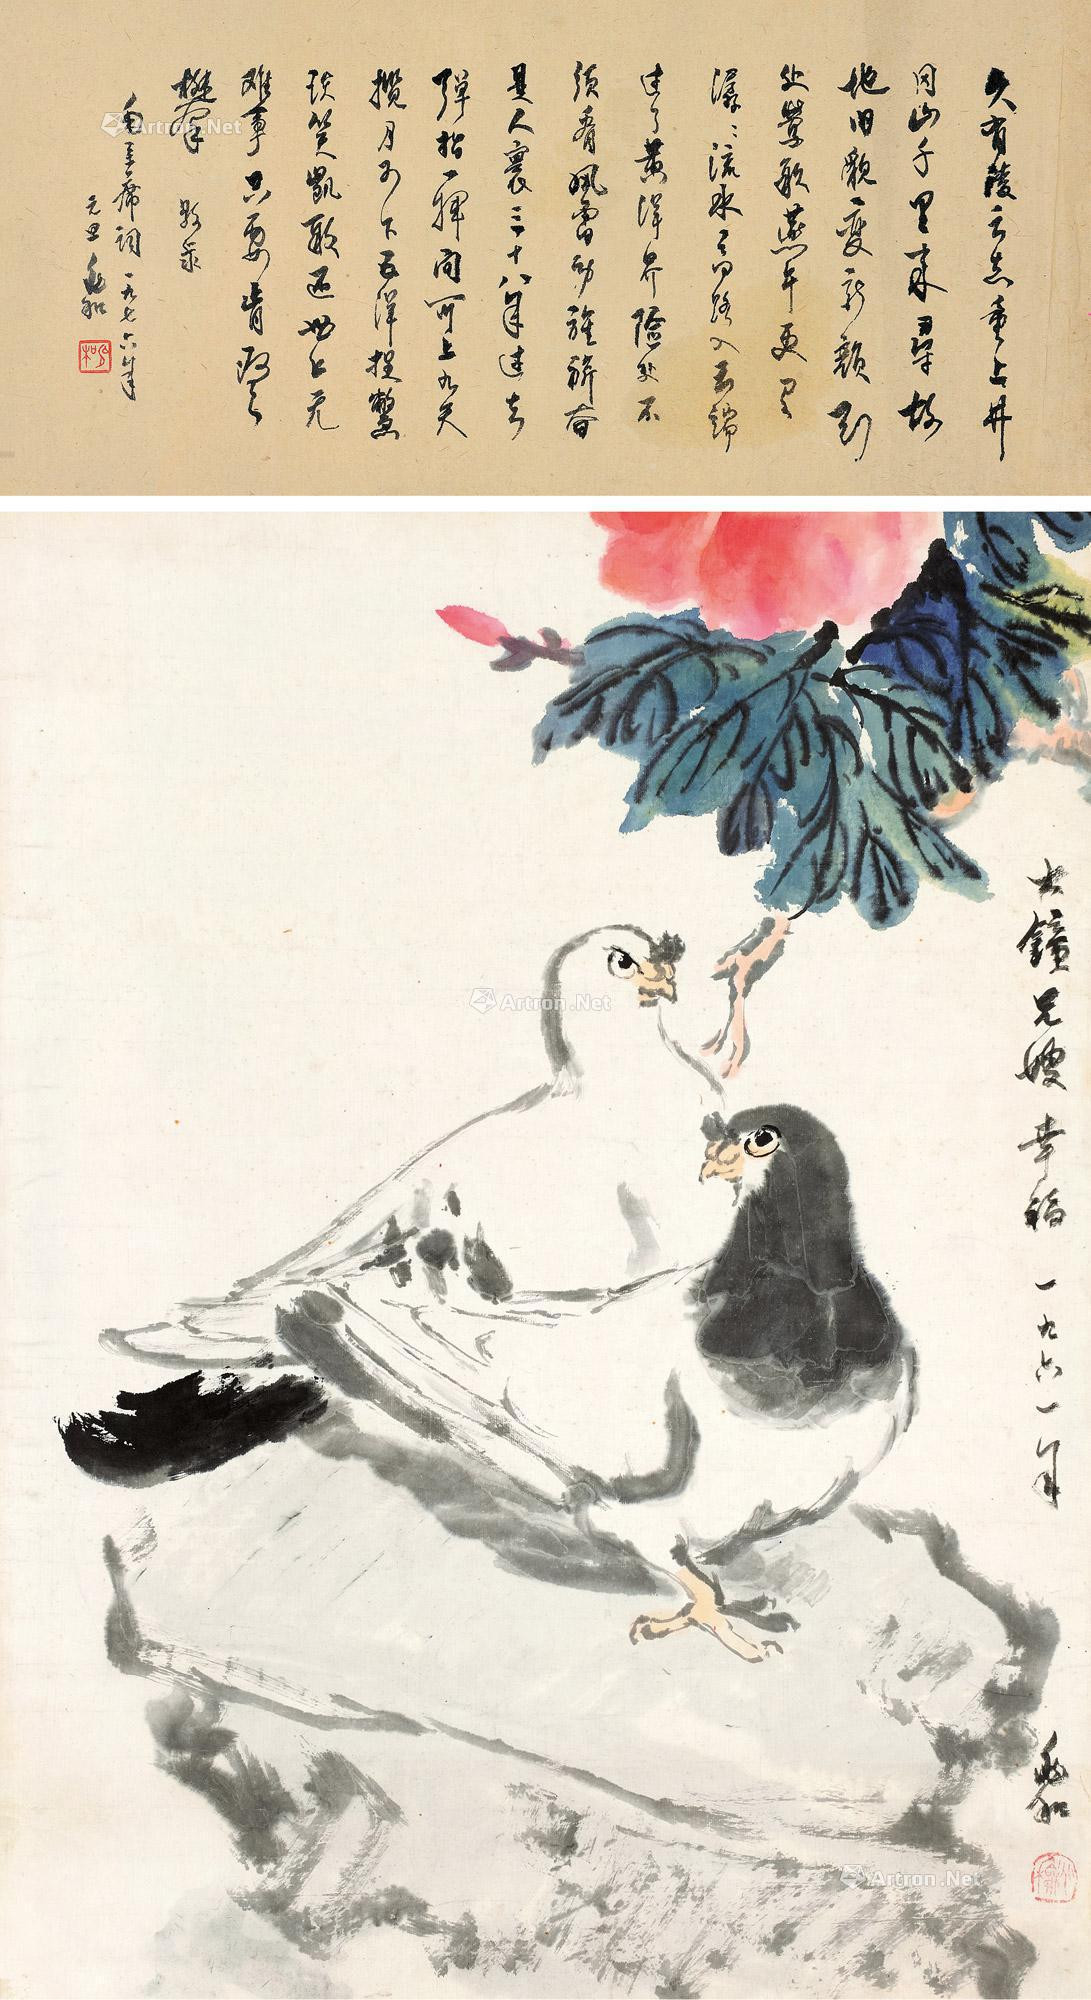 Peony and Pigeons with Calligraphy- Poem by Mao Zedong